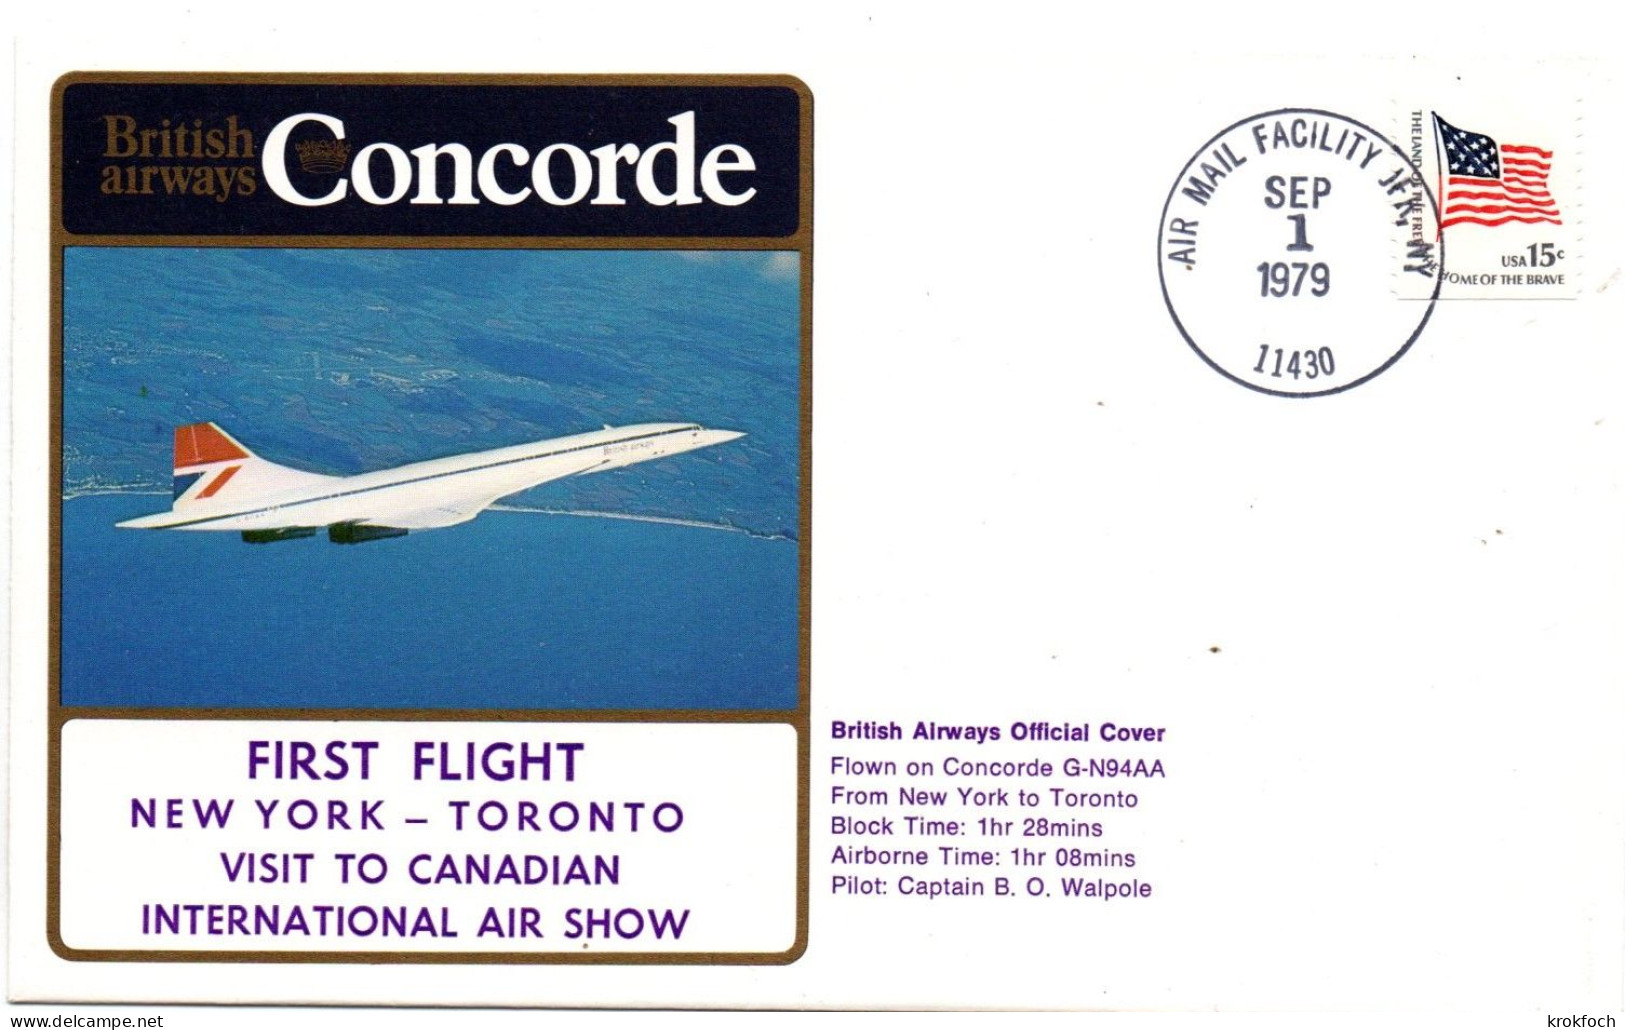 Concorde BA New York Toronto 1979 -  Visit To Canadian Air Show -1er Vol - First Flight Covers